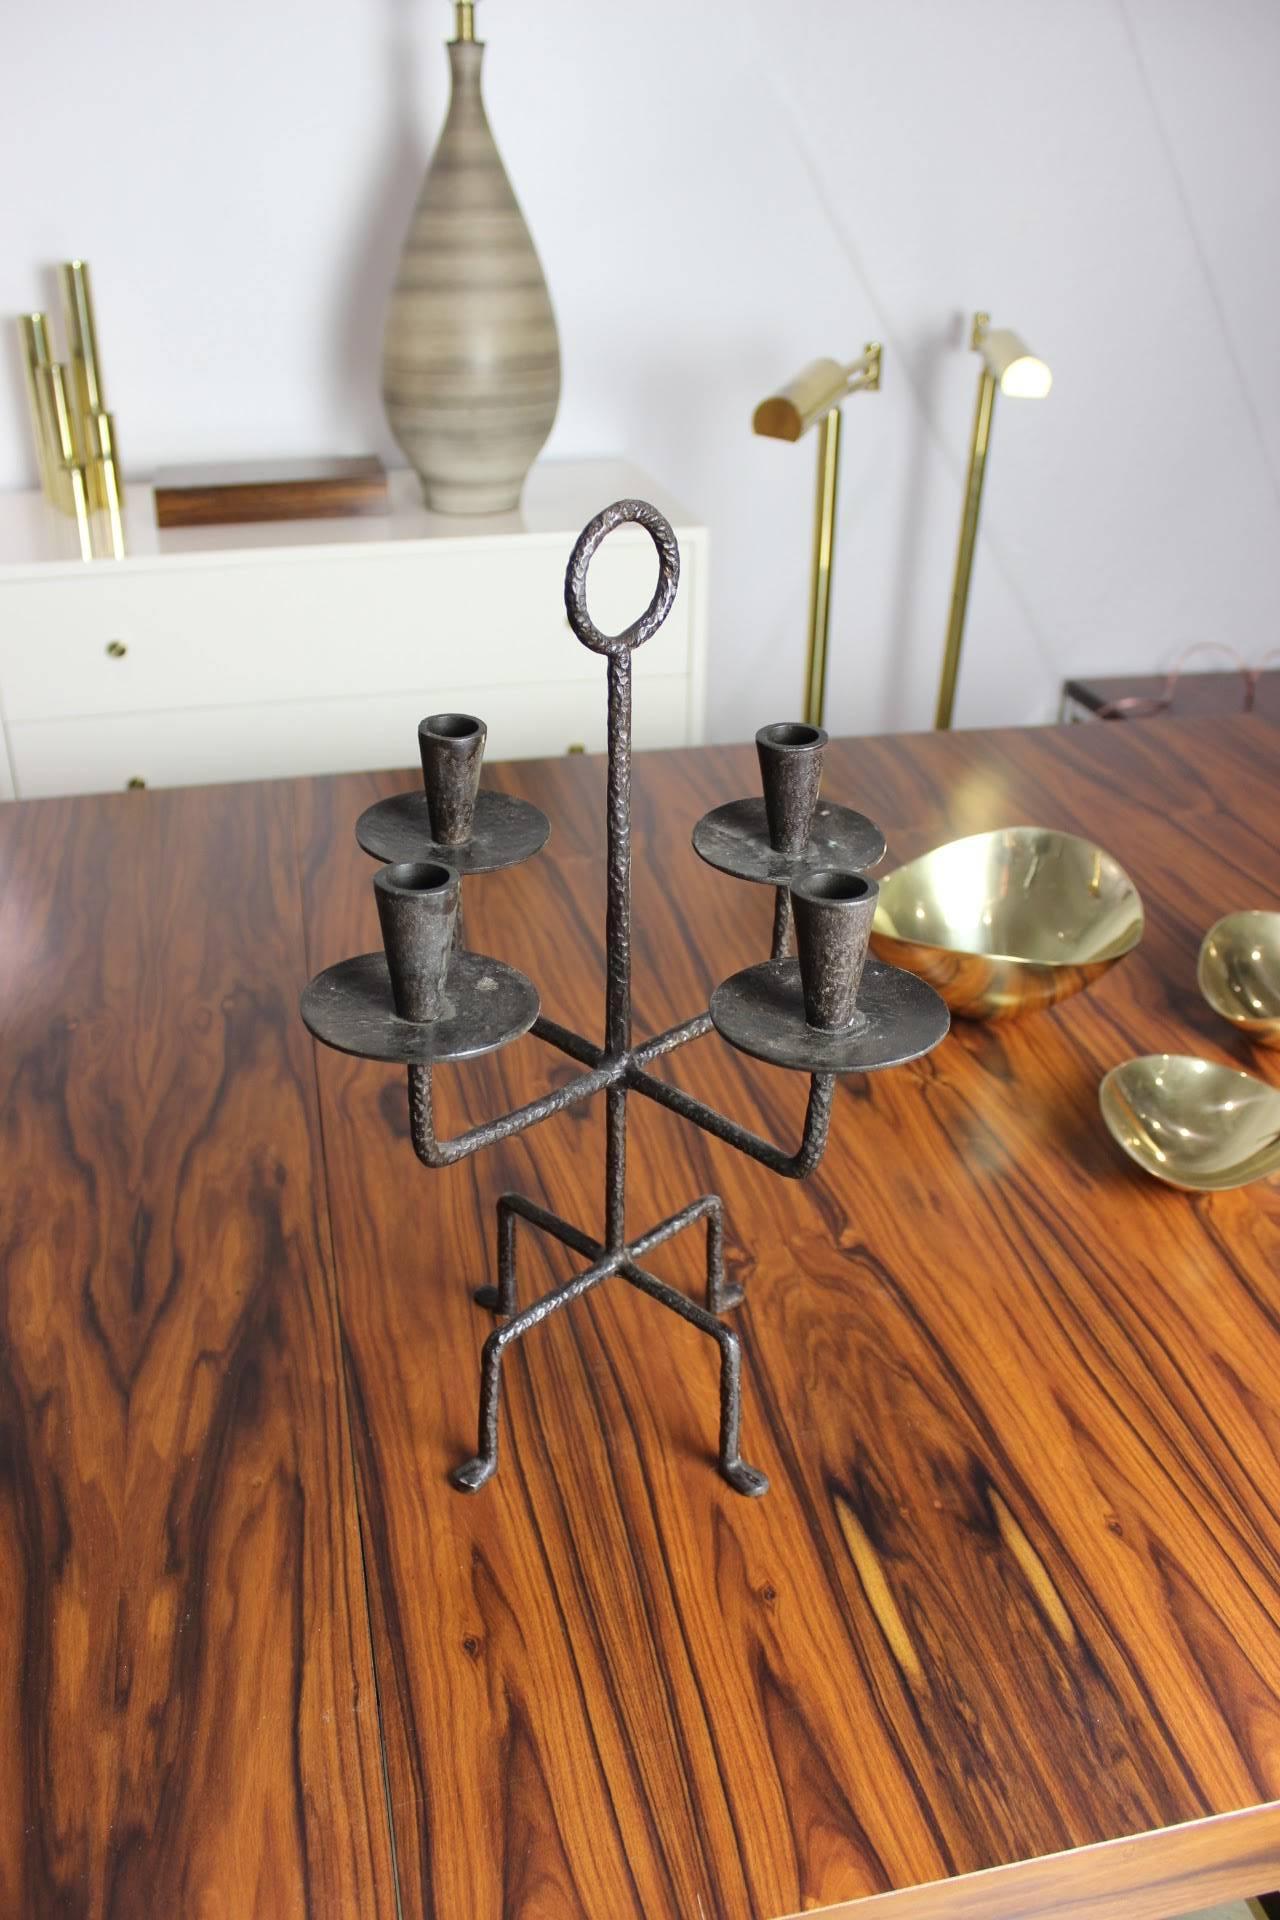 Large wrought iron candelabrum in the style of Tommi Parzinger, 1950s

Various Patinas Available:

Light Antique
Dark Antique
Burnished Bronze
Brushed Brass
Mirrored Brass
Brushed Stainless Steel 
Mirrored Stainless Steel